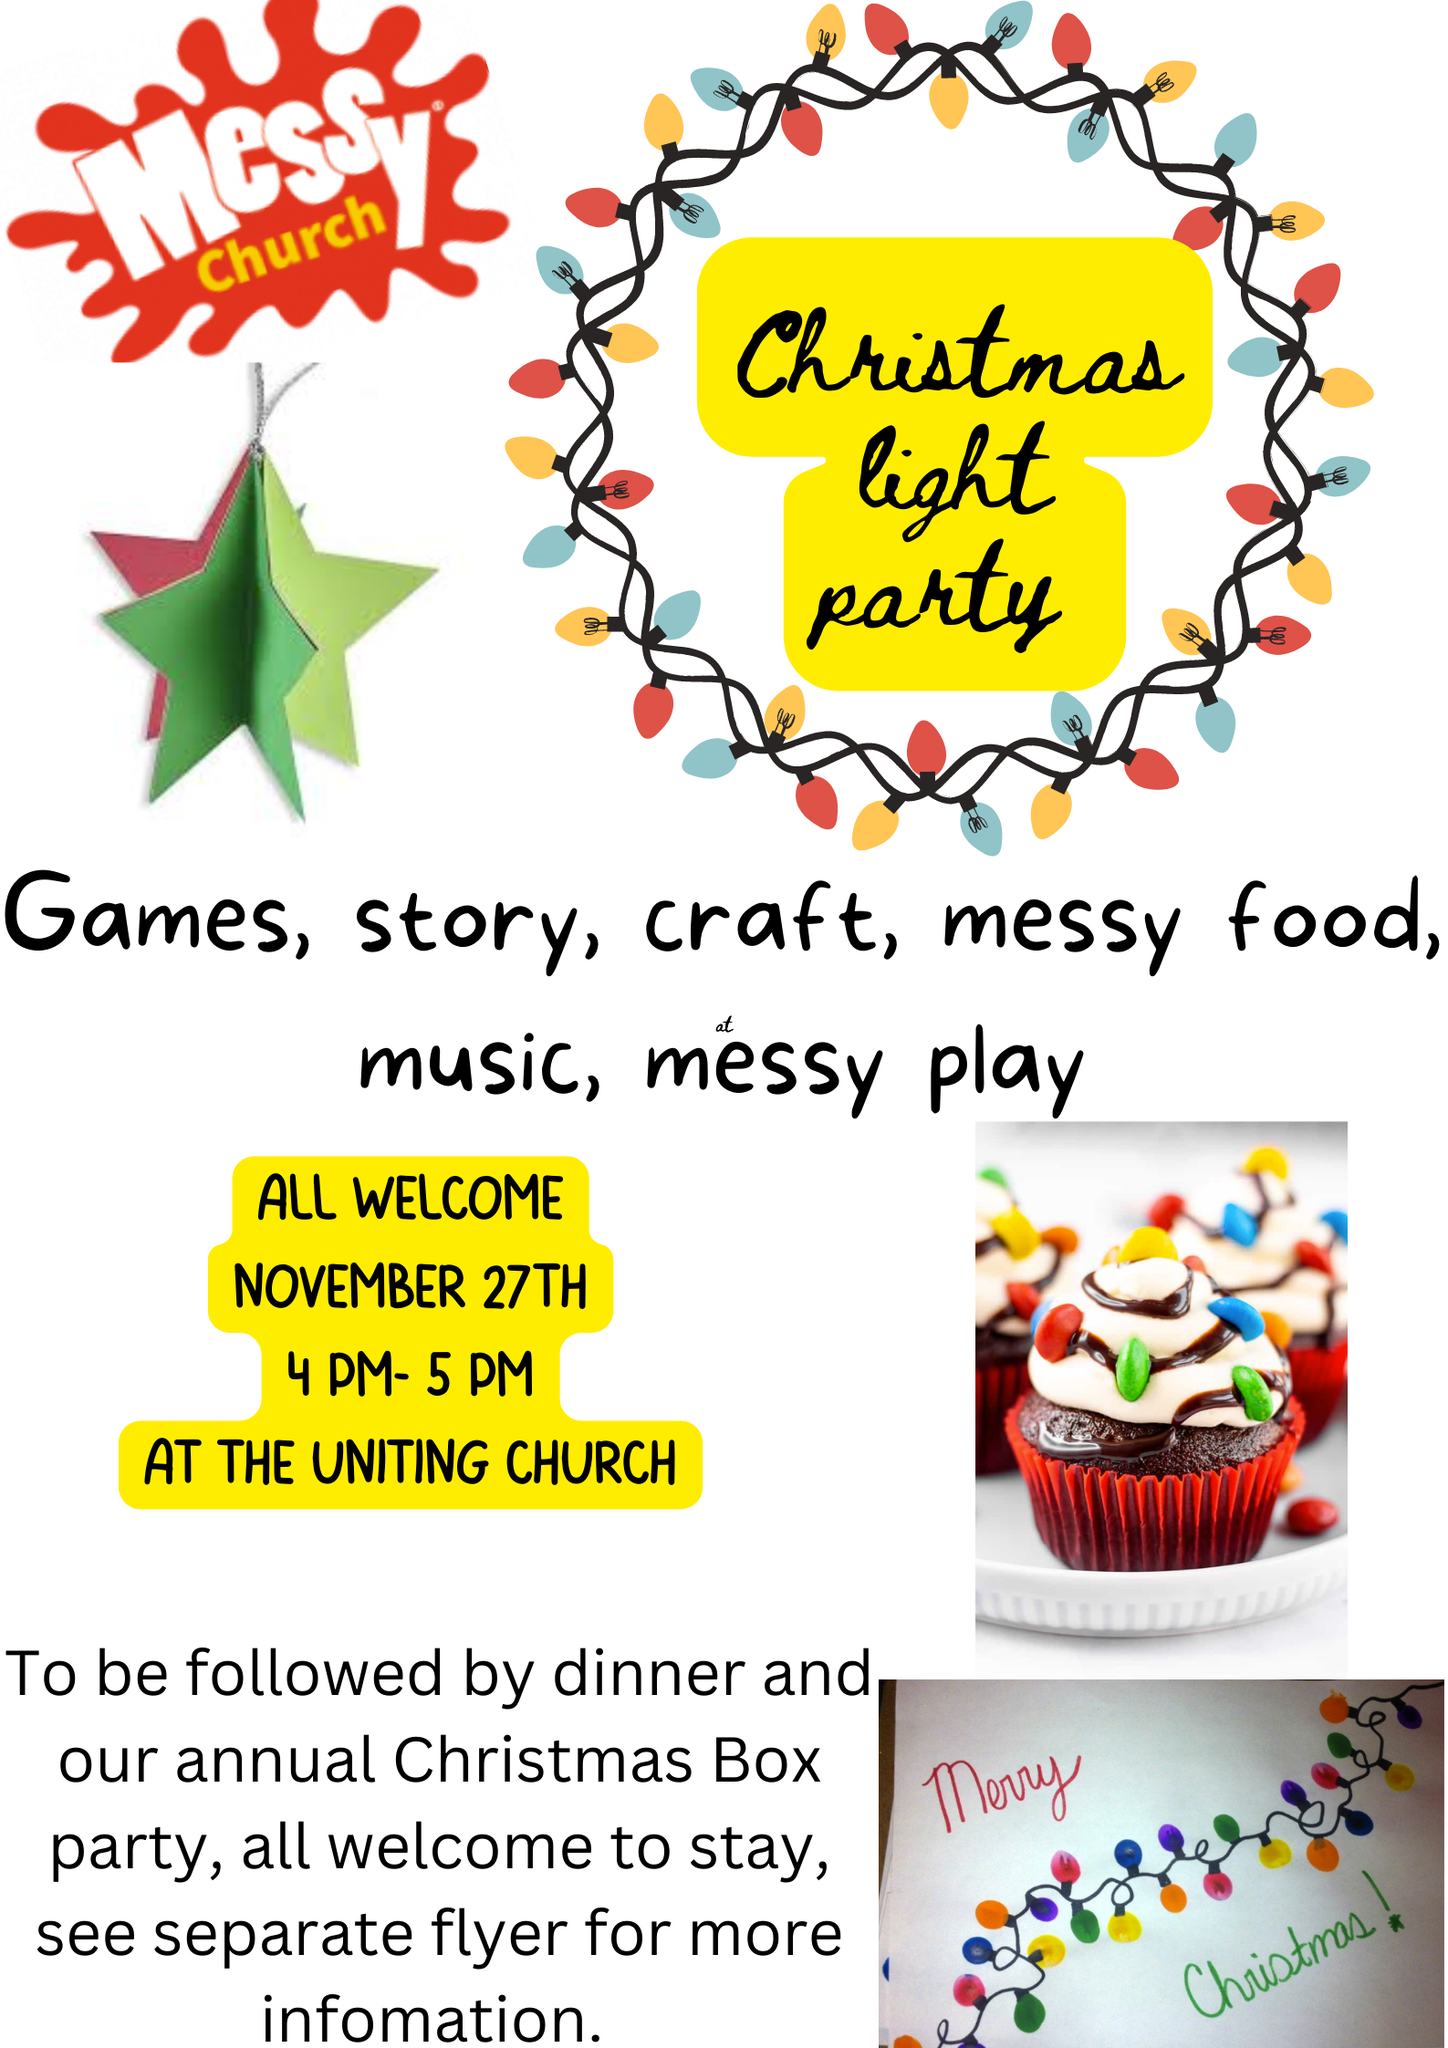 Coleambally 'Messy Church' Christmas light party